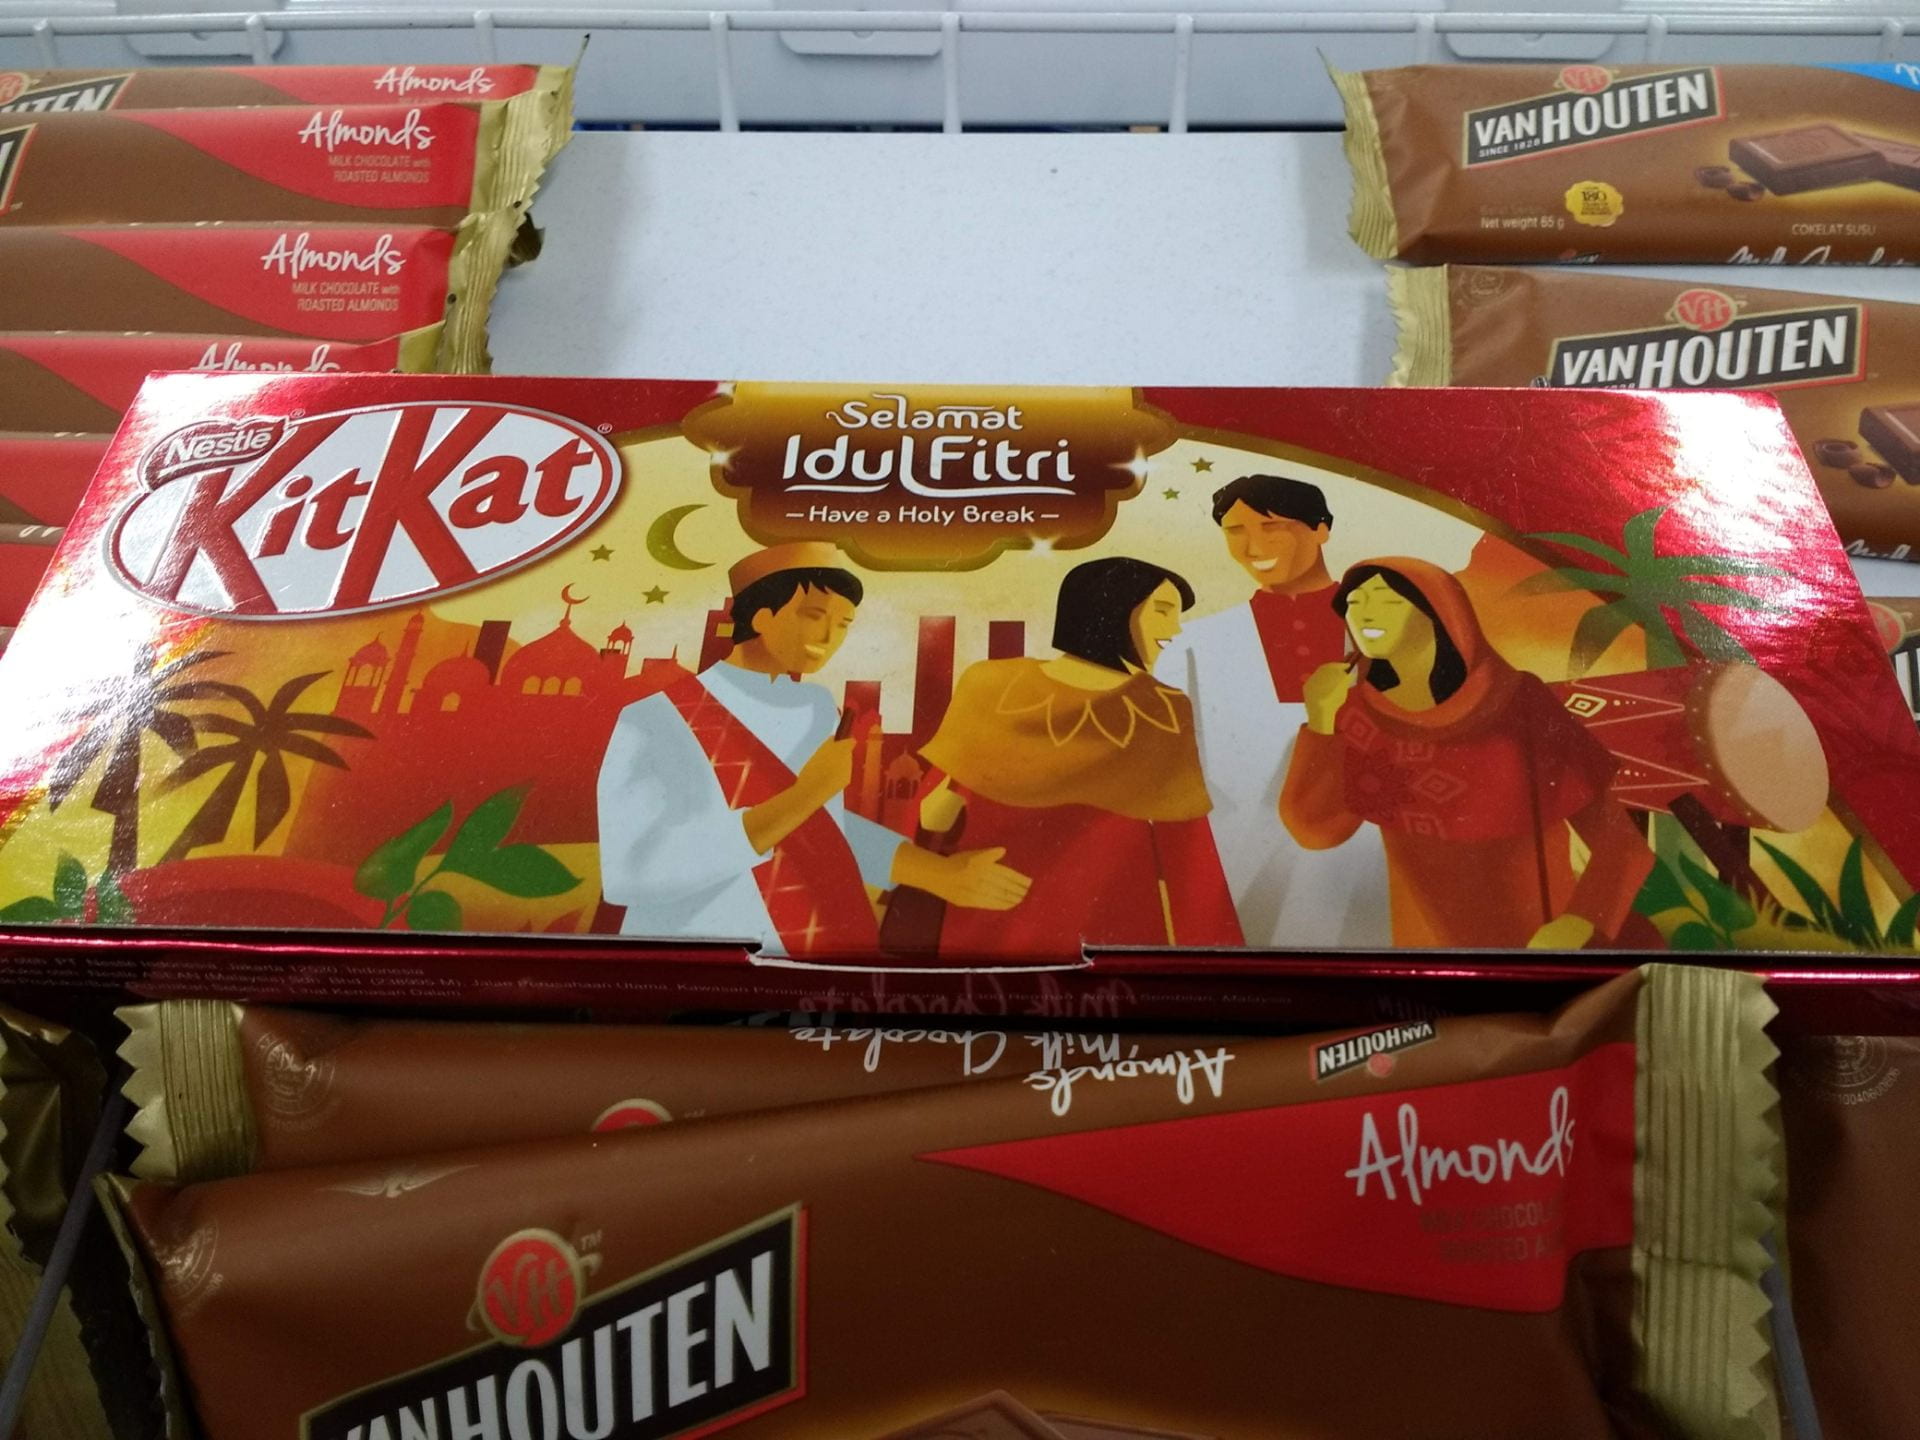 KitKat package marketed towards Muslims in Southeast Asia